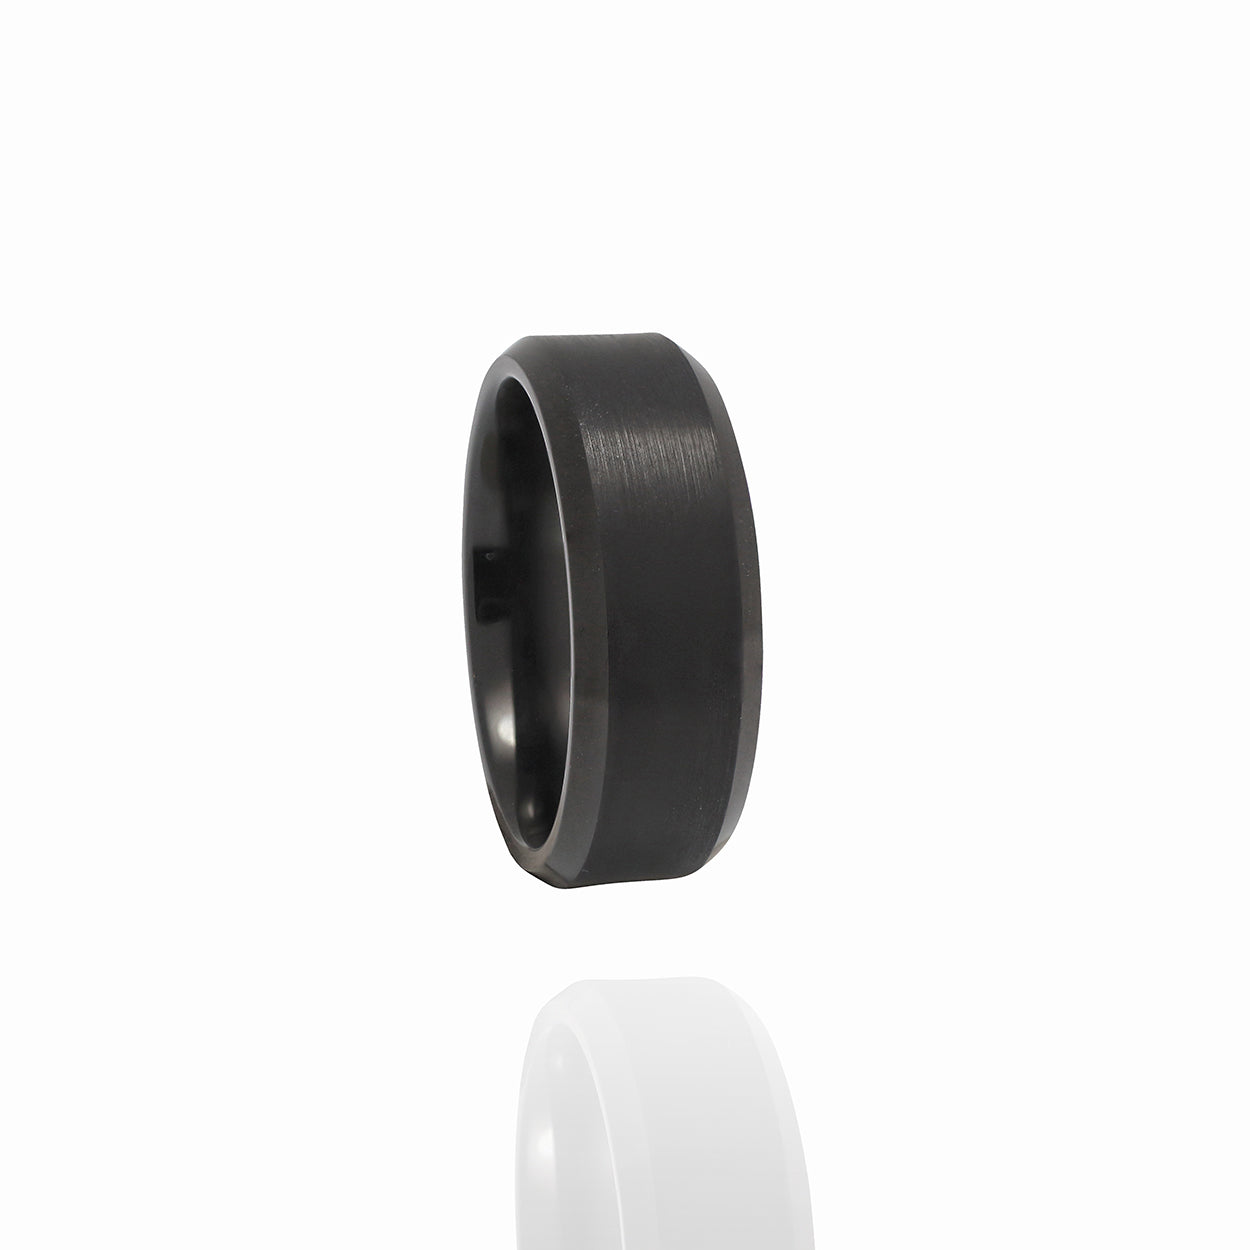 Satin and Black Enamel Finished Tungsten Carbide Ring